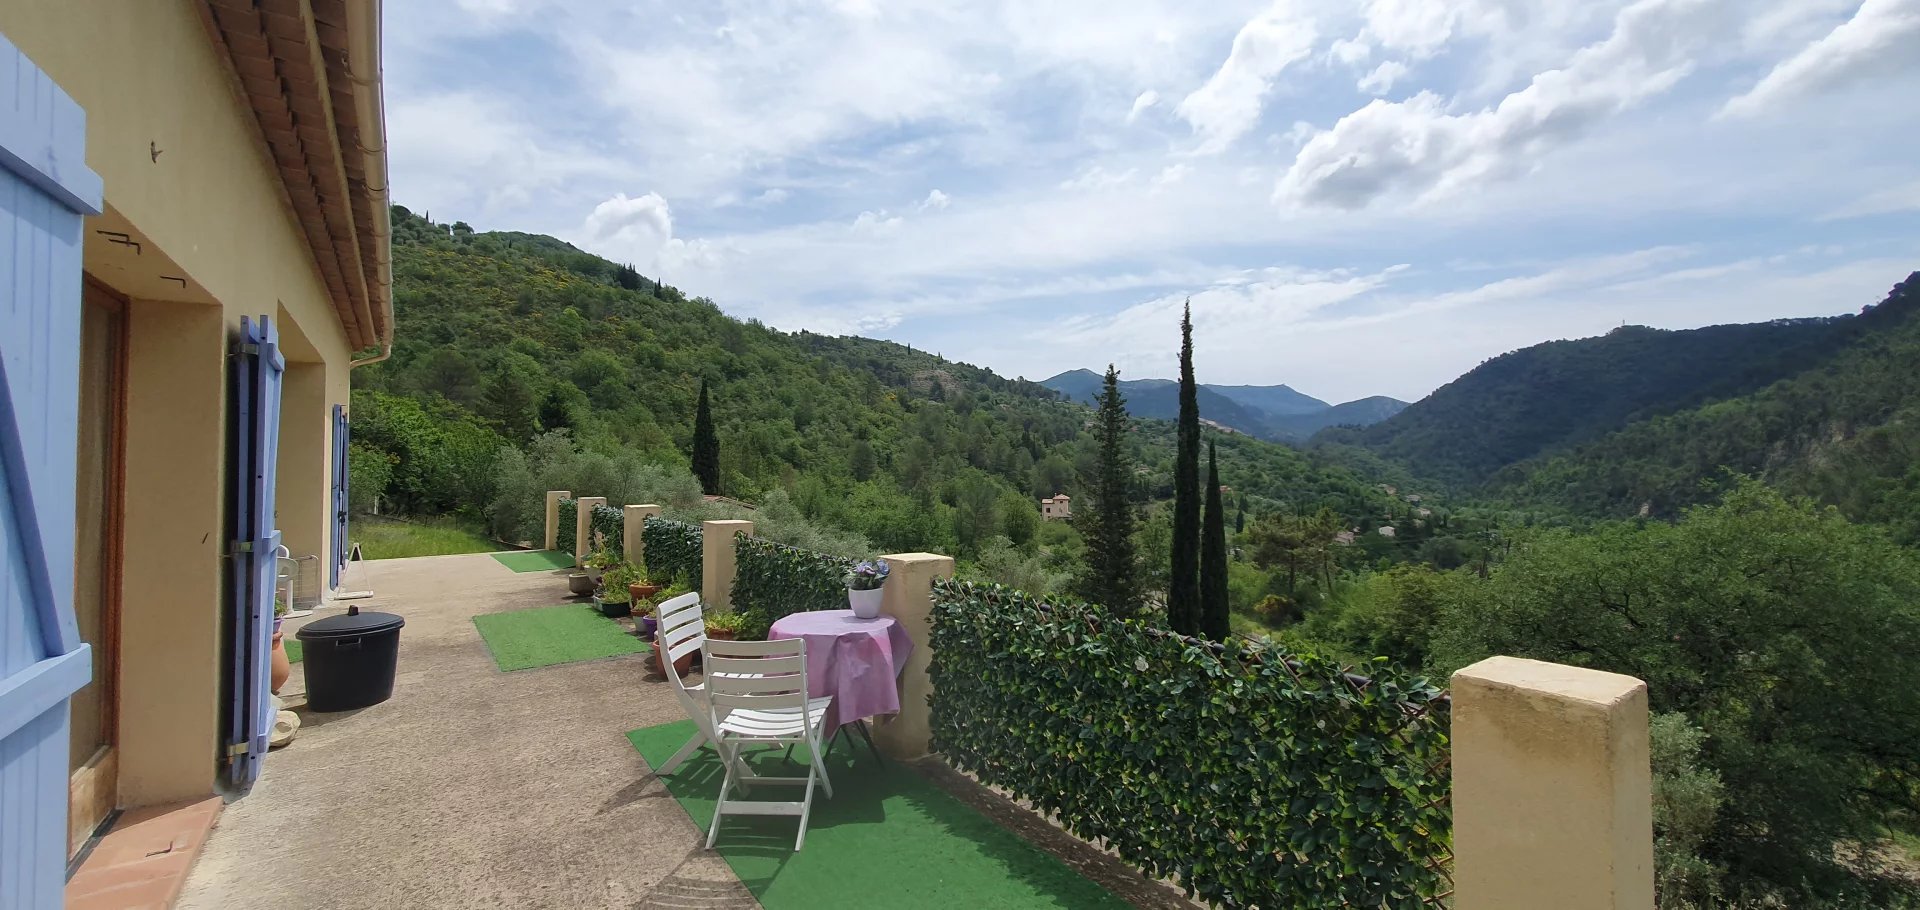 30 mins from Nice House 130m2 + 135m2 outbuildings